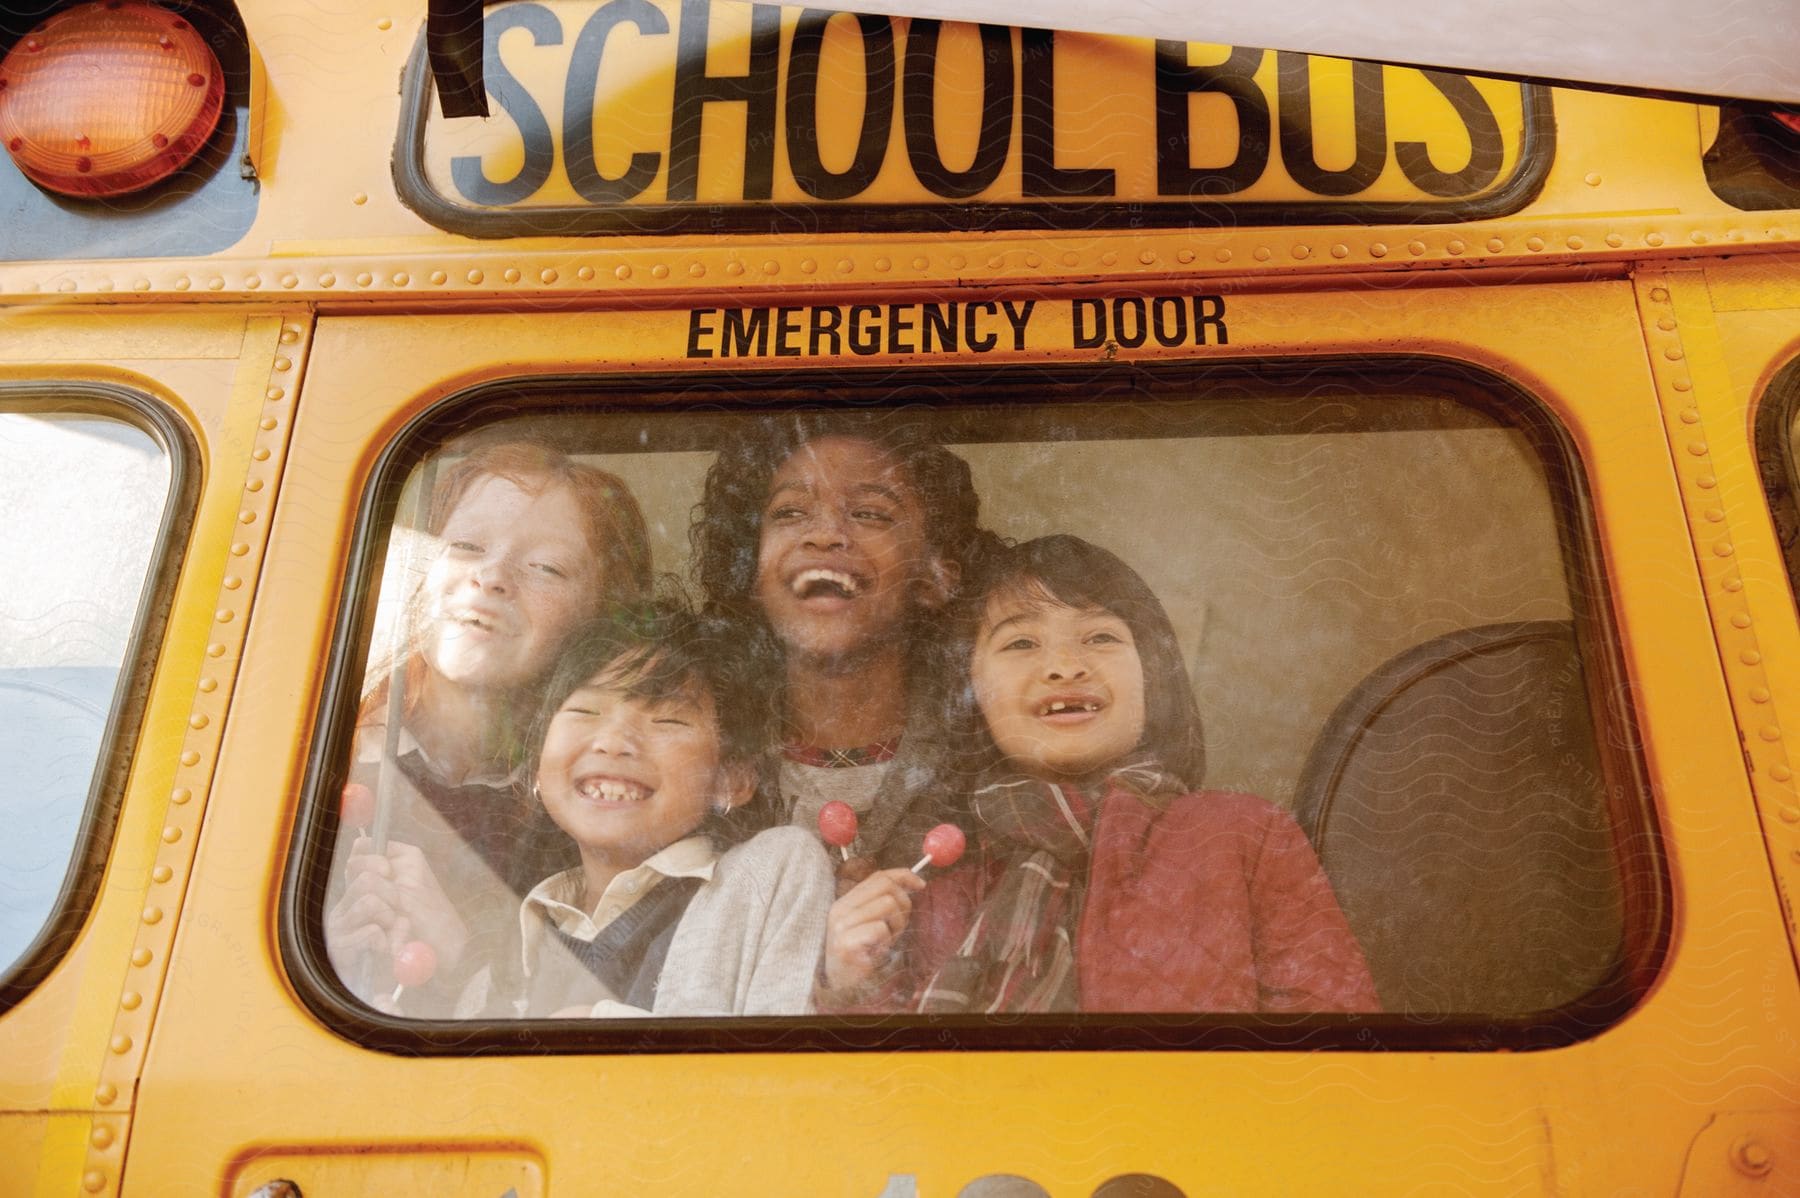 A group of students traveling on a school bus and laughing